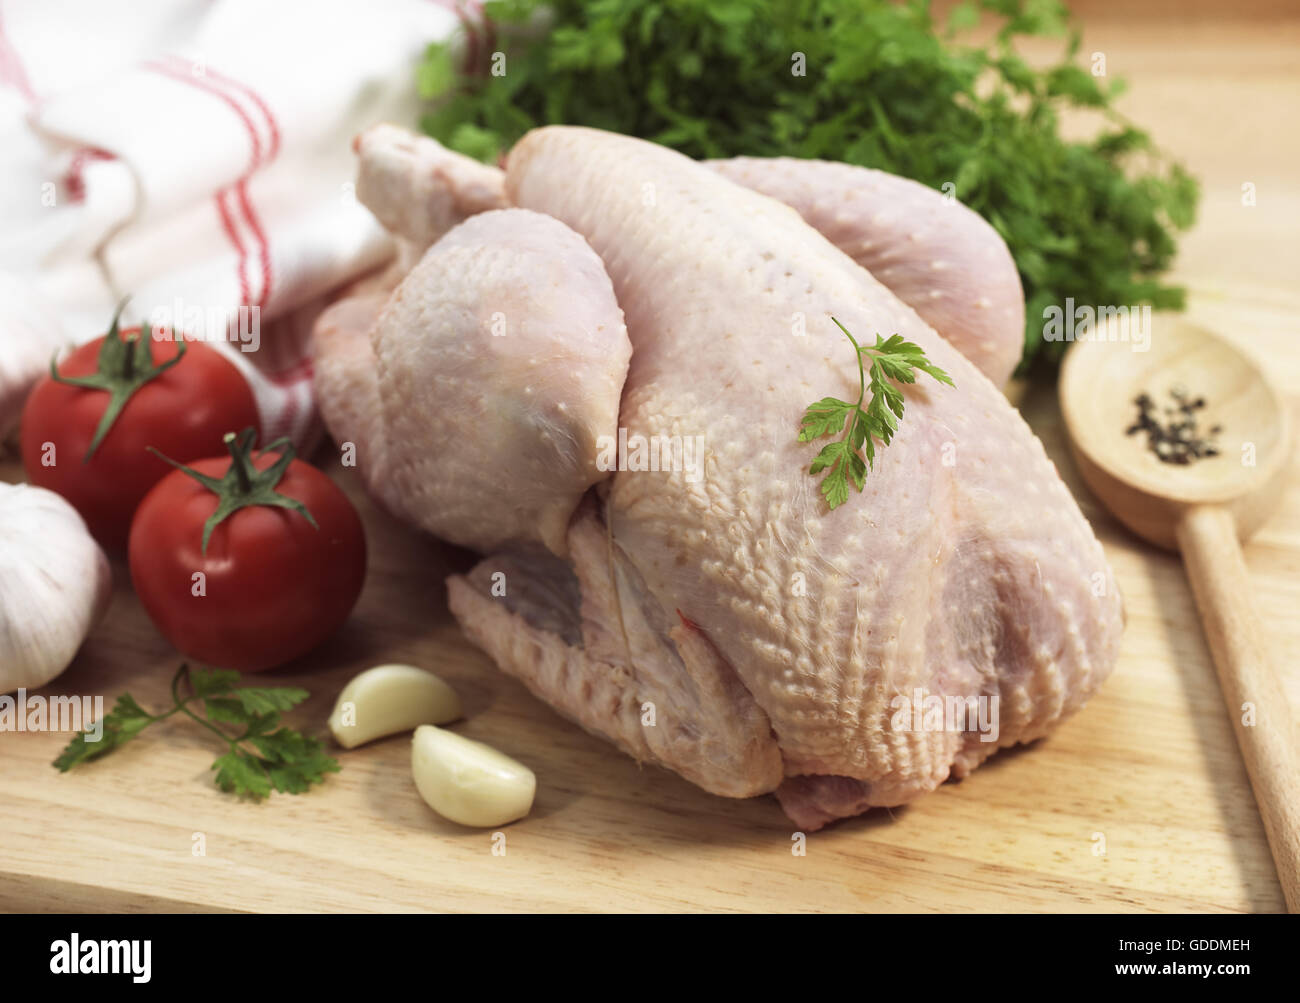 CHICKEN READY TO COOK WITH TOMATO, GARLIC AND PARSLEY Stock Photo